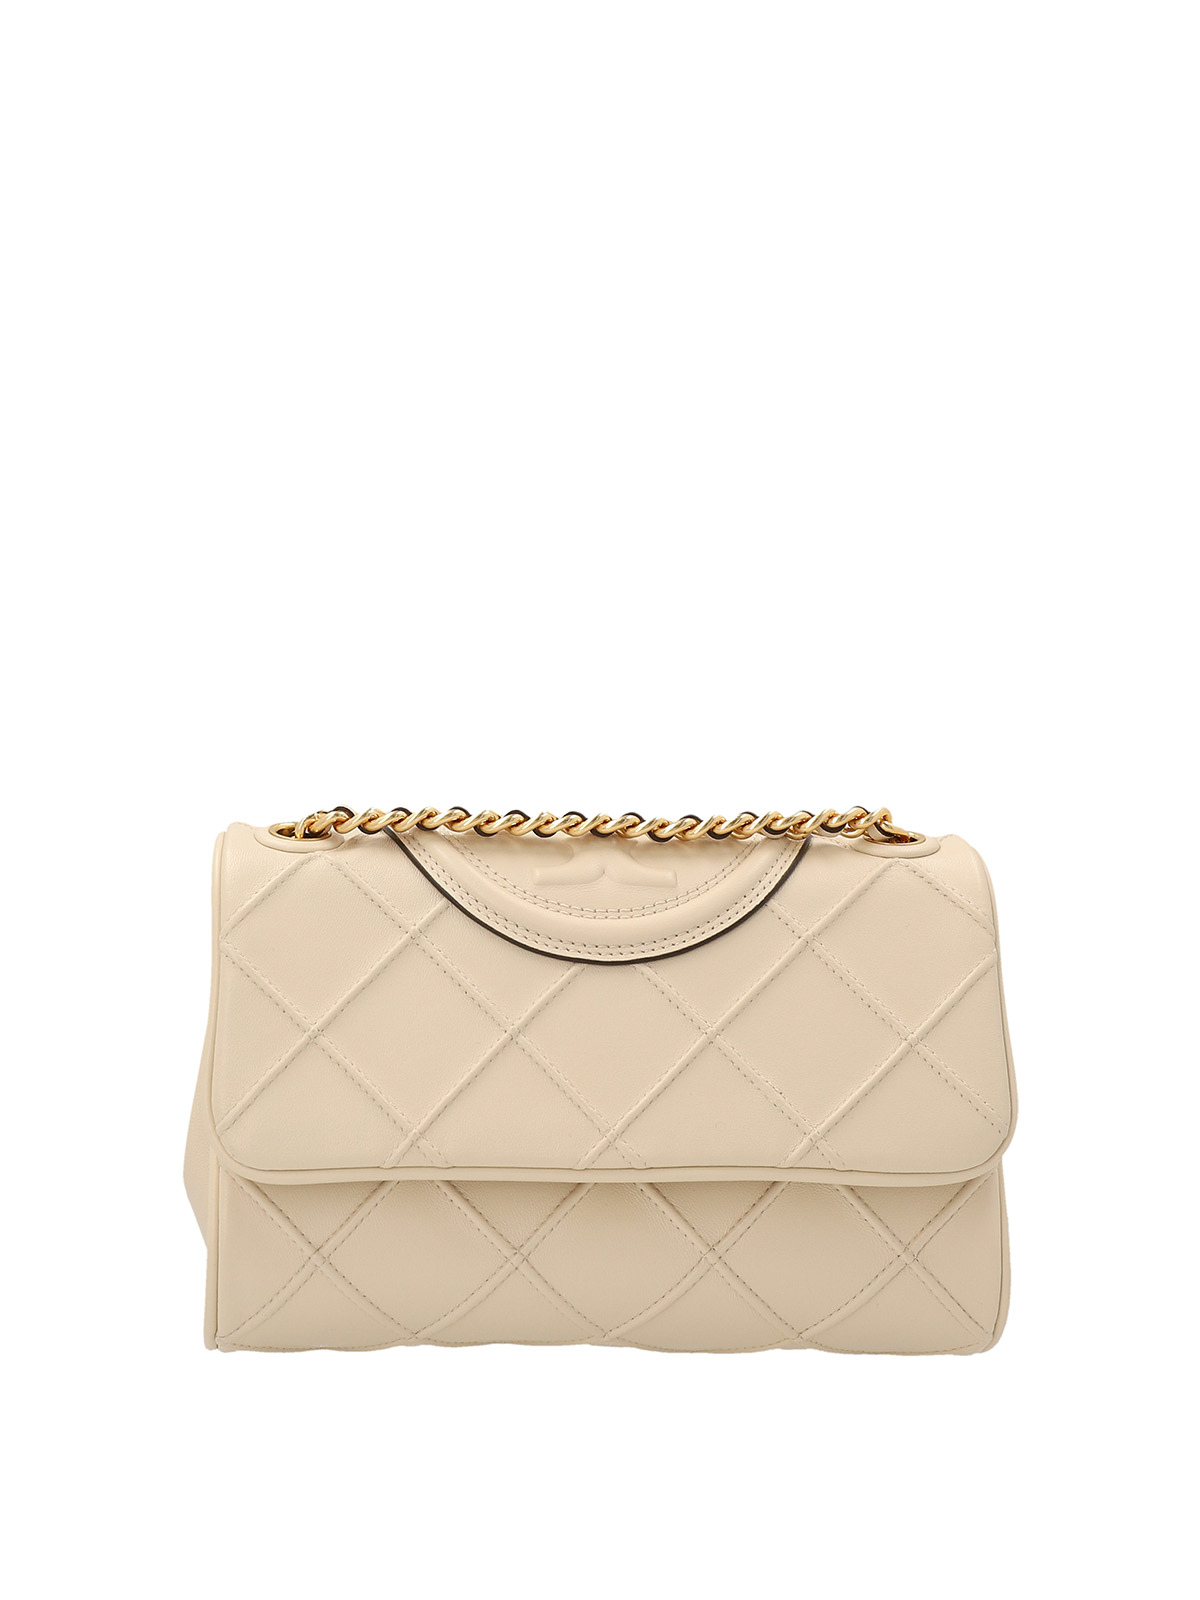 Fleming Small Leather Shoulder Bag in Beige - Tory Burch